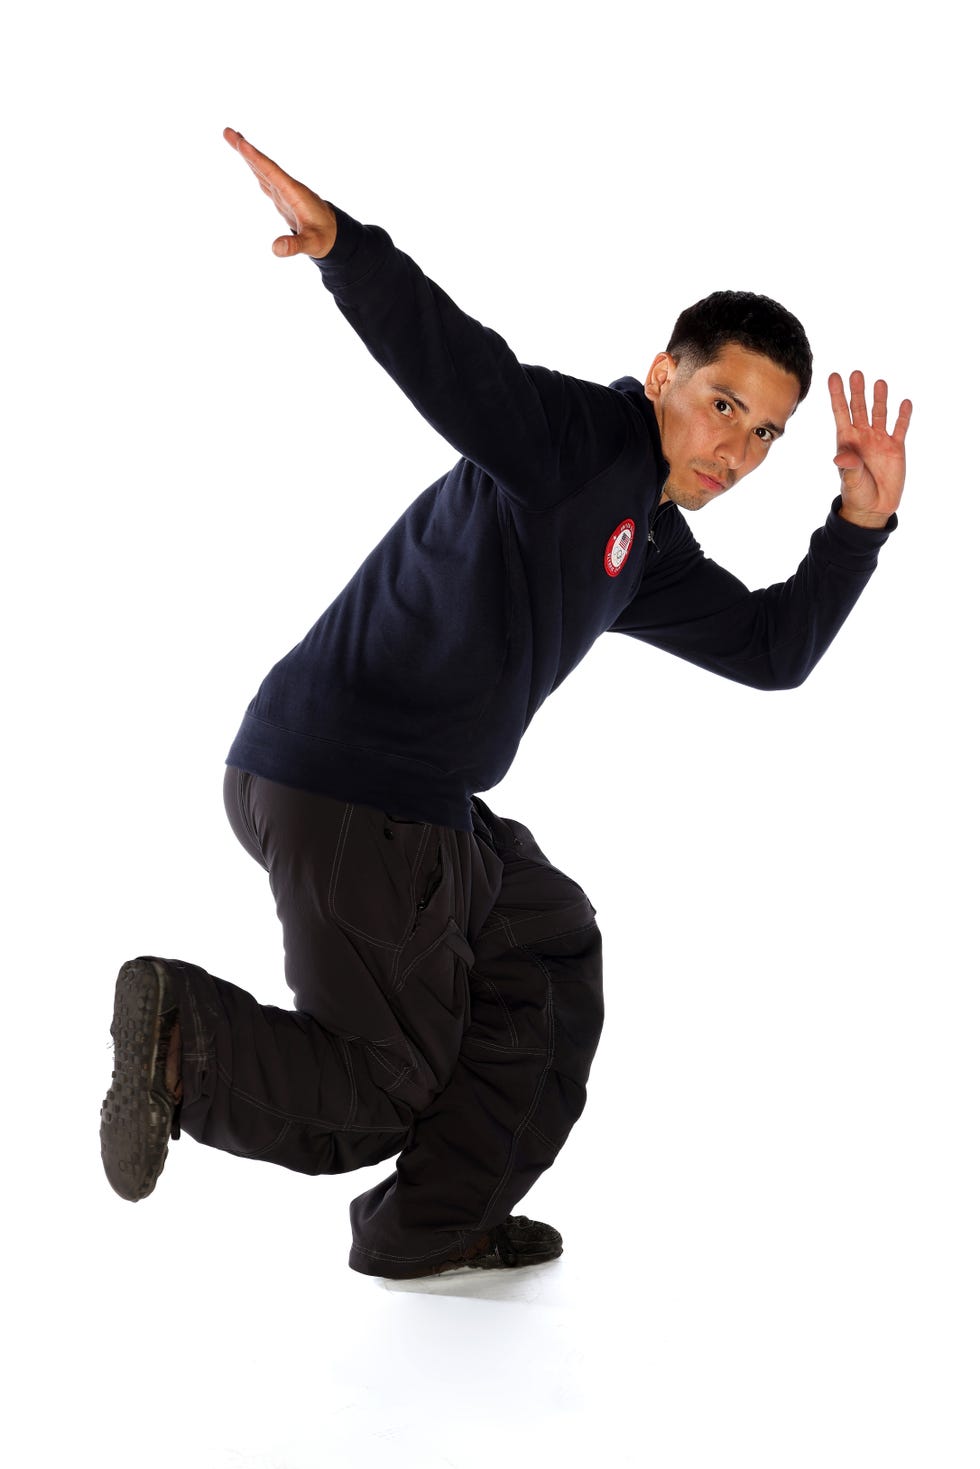 us breakdancer victor montalvo holding a dance pose in front of a white background